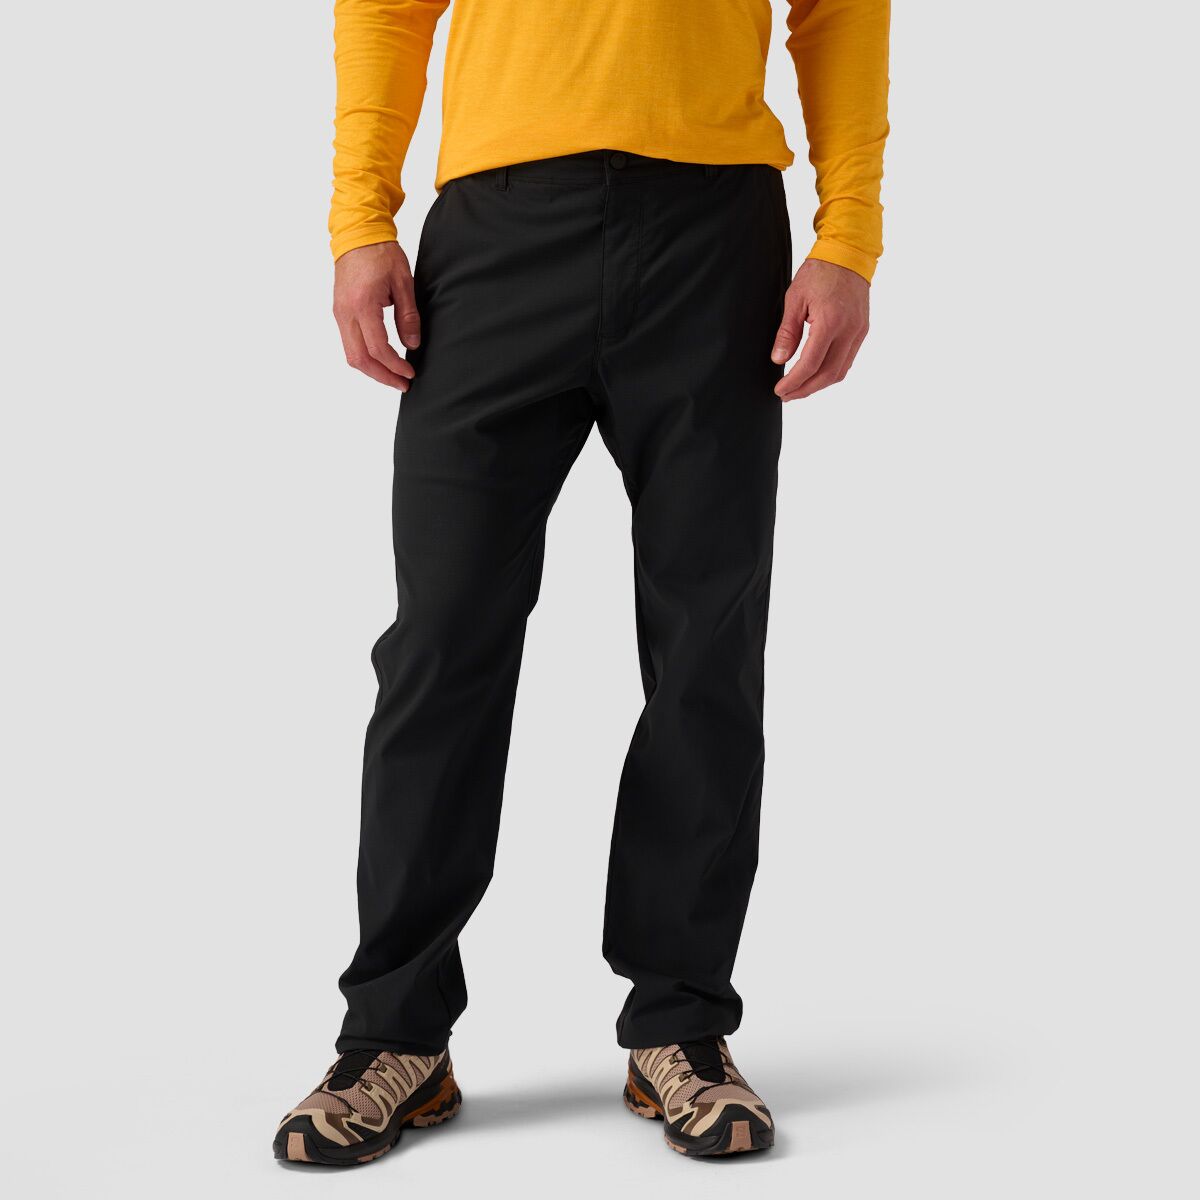 Backcountry Basis Everyday Pant - Men's - Clothing